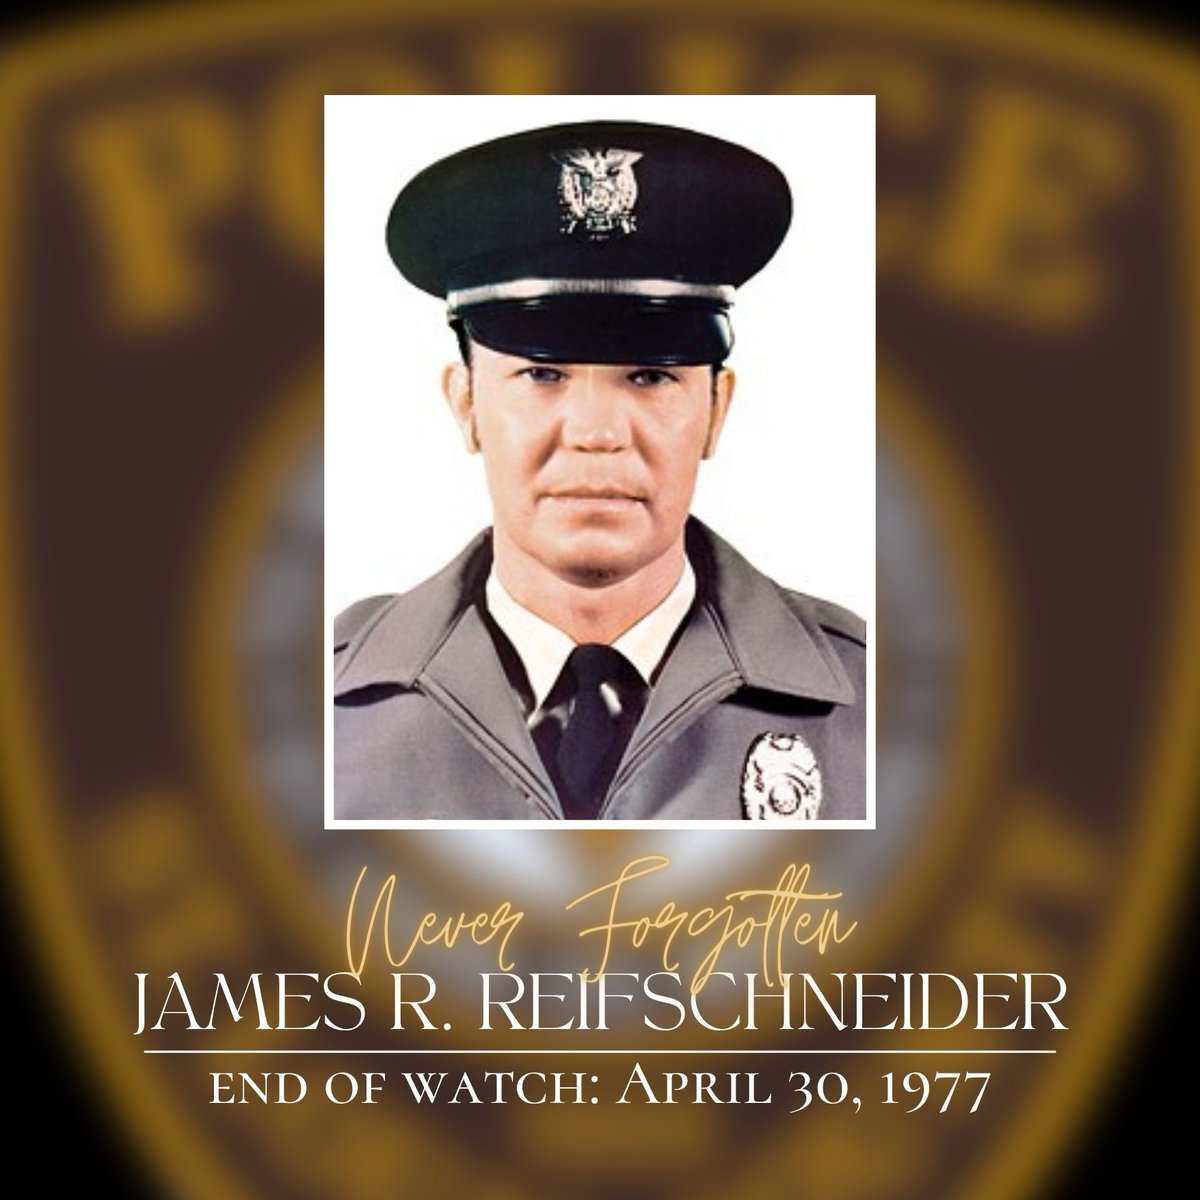 Never Forgotten. Today, we honor the memory of Officer James R. Reifschneider, who died in the line of duty on April 30, 1977. He will never be forgotten. stlouiscountypolice.com/who-we-are/nev…